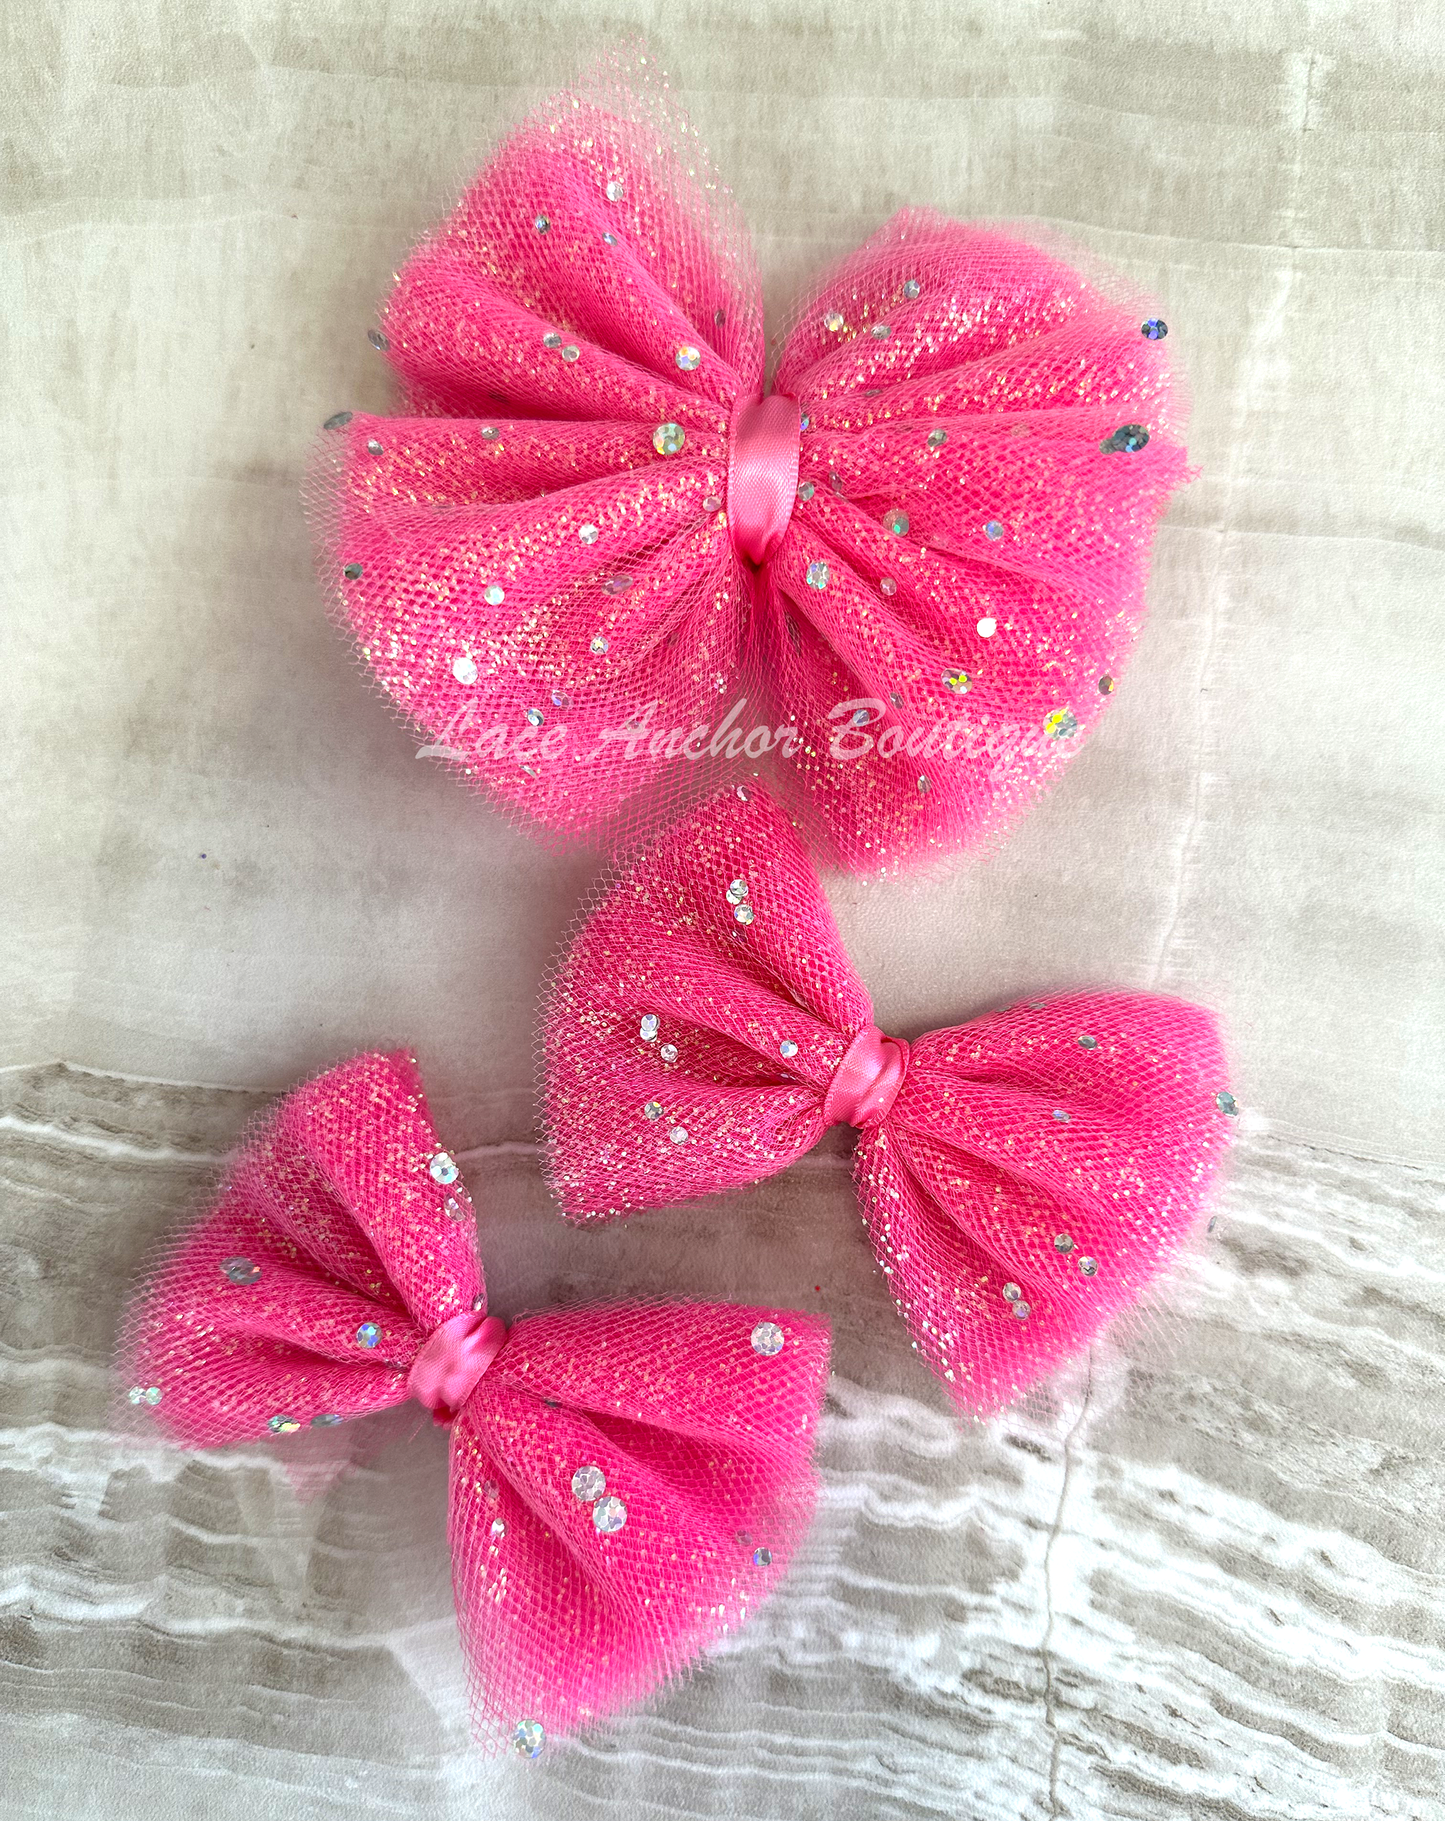 handmade custom tulle girls hair bow or piggies clips with silver squin sparkles and glitter in hot pink.